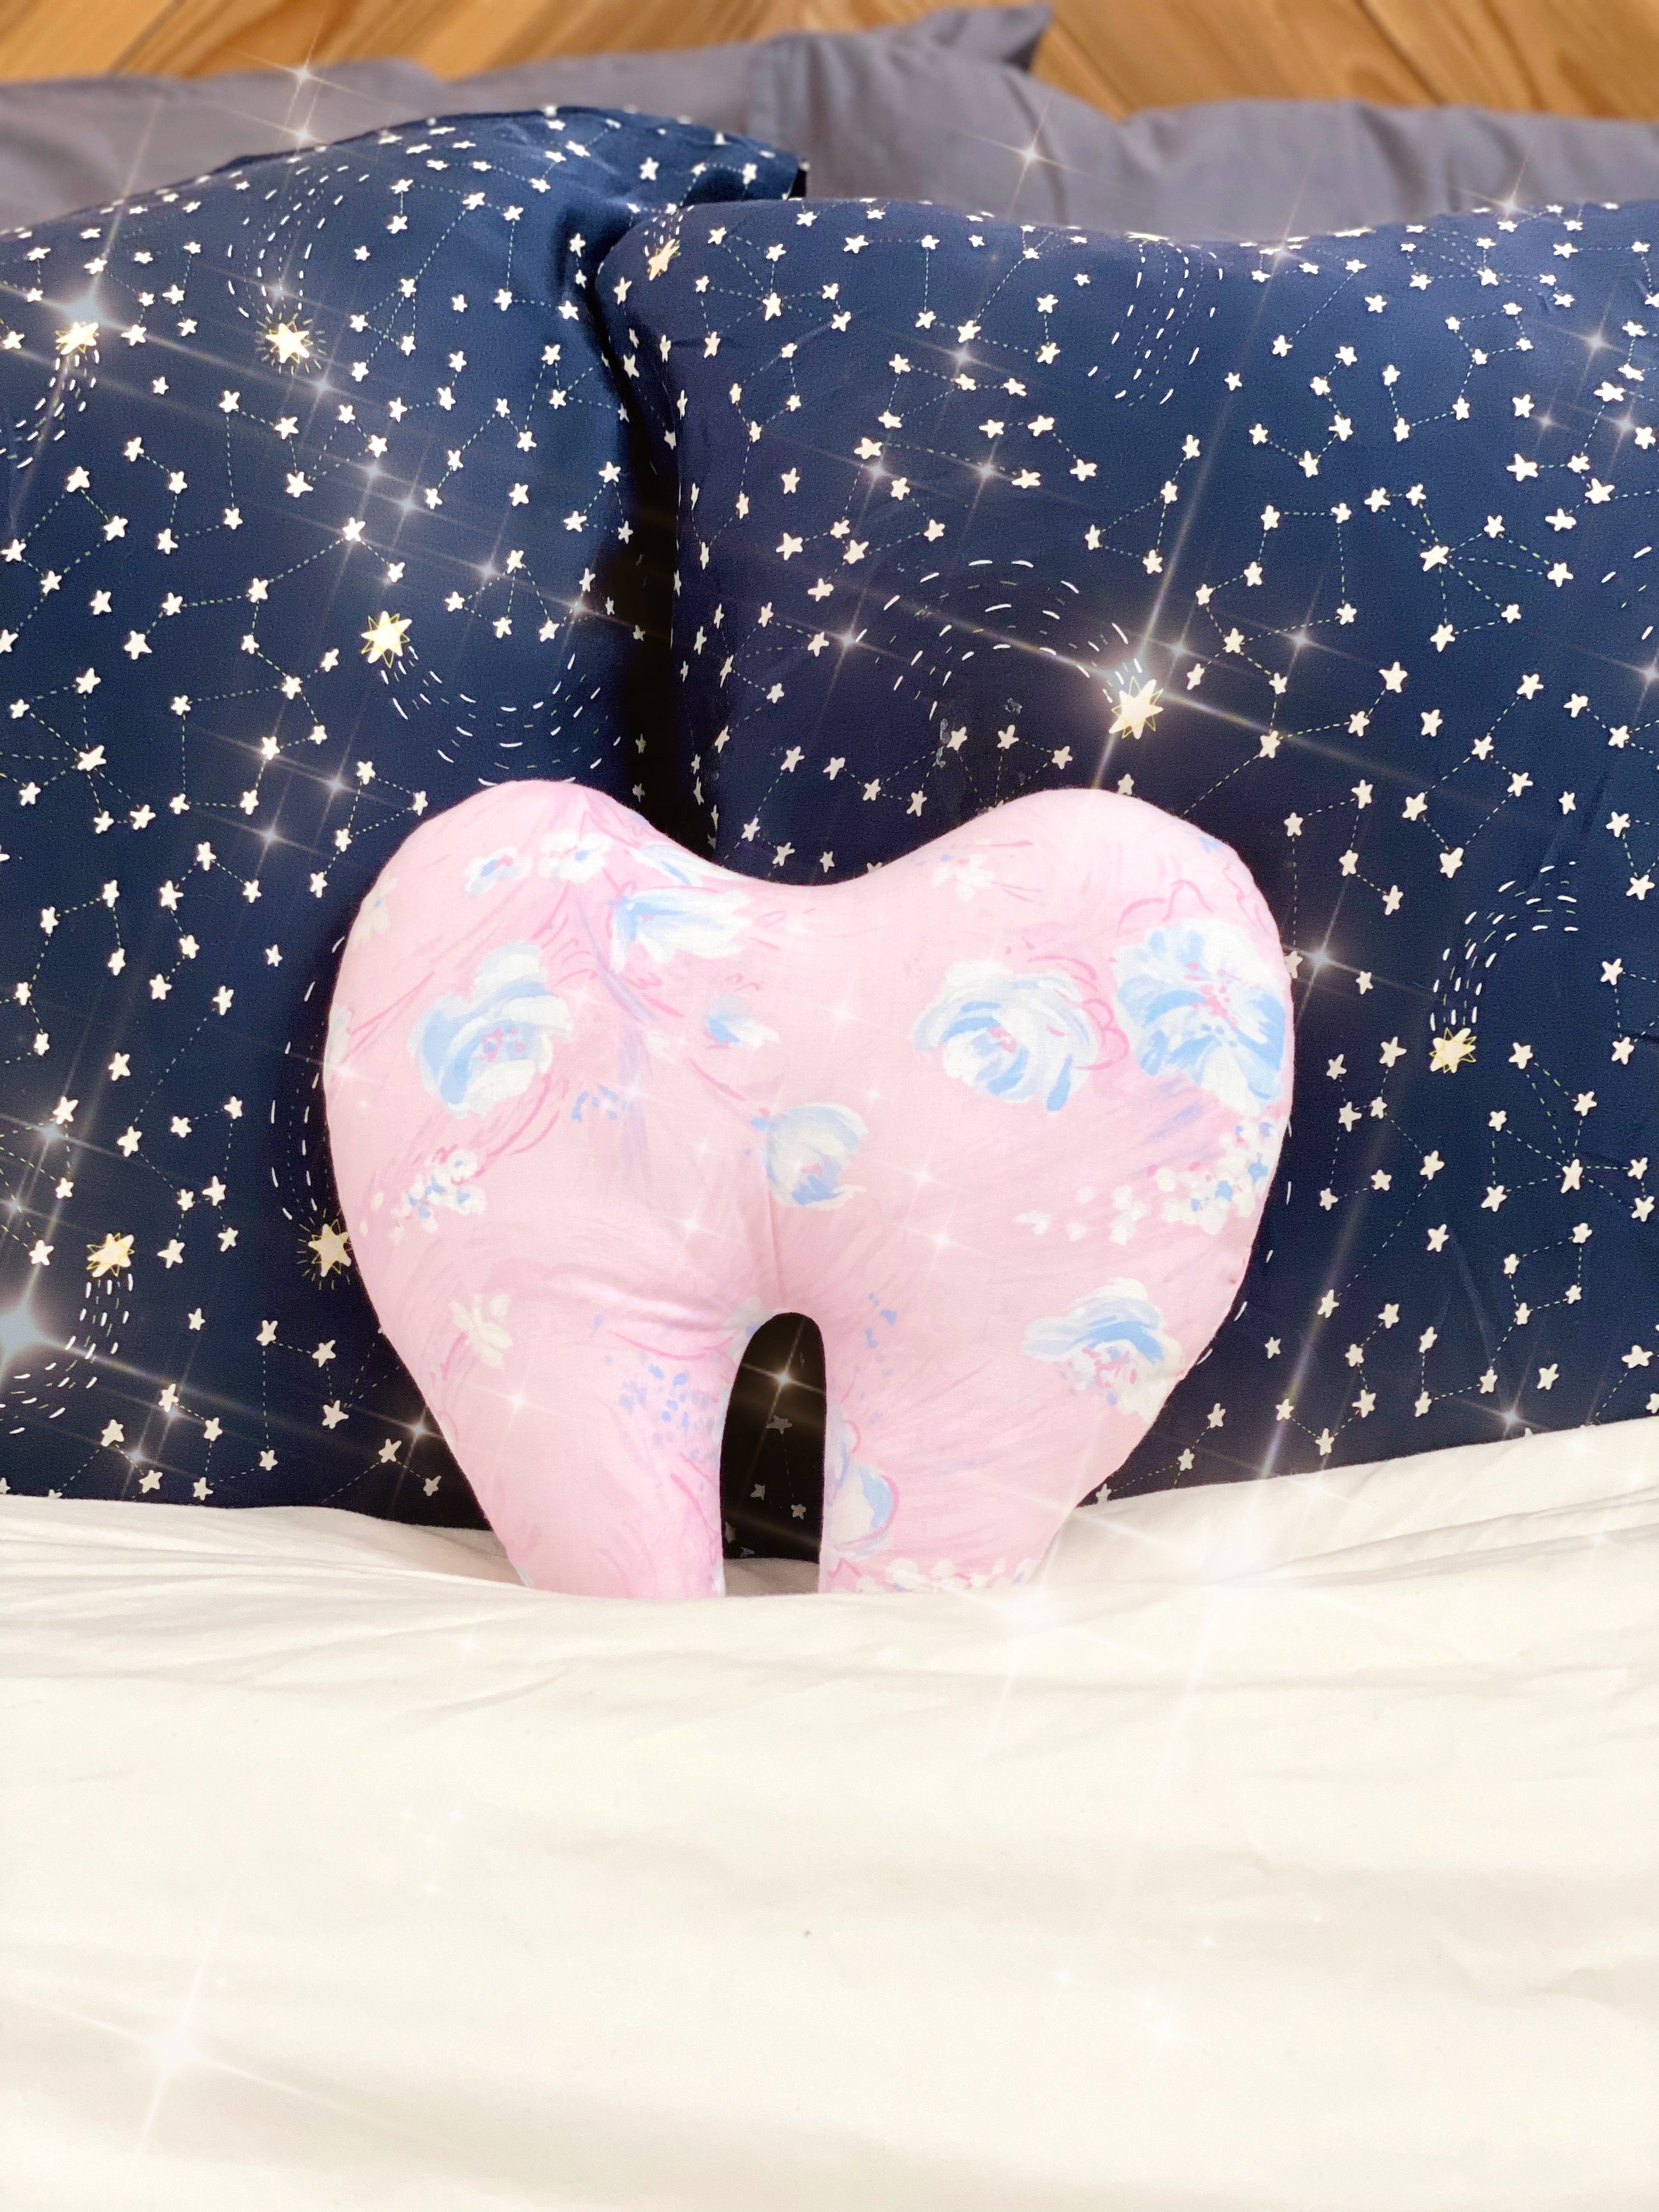 CRAFTY TOOTH 🦷 FAIRY 🧚‍♂️ PILLOW ☁️